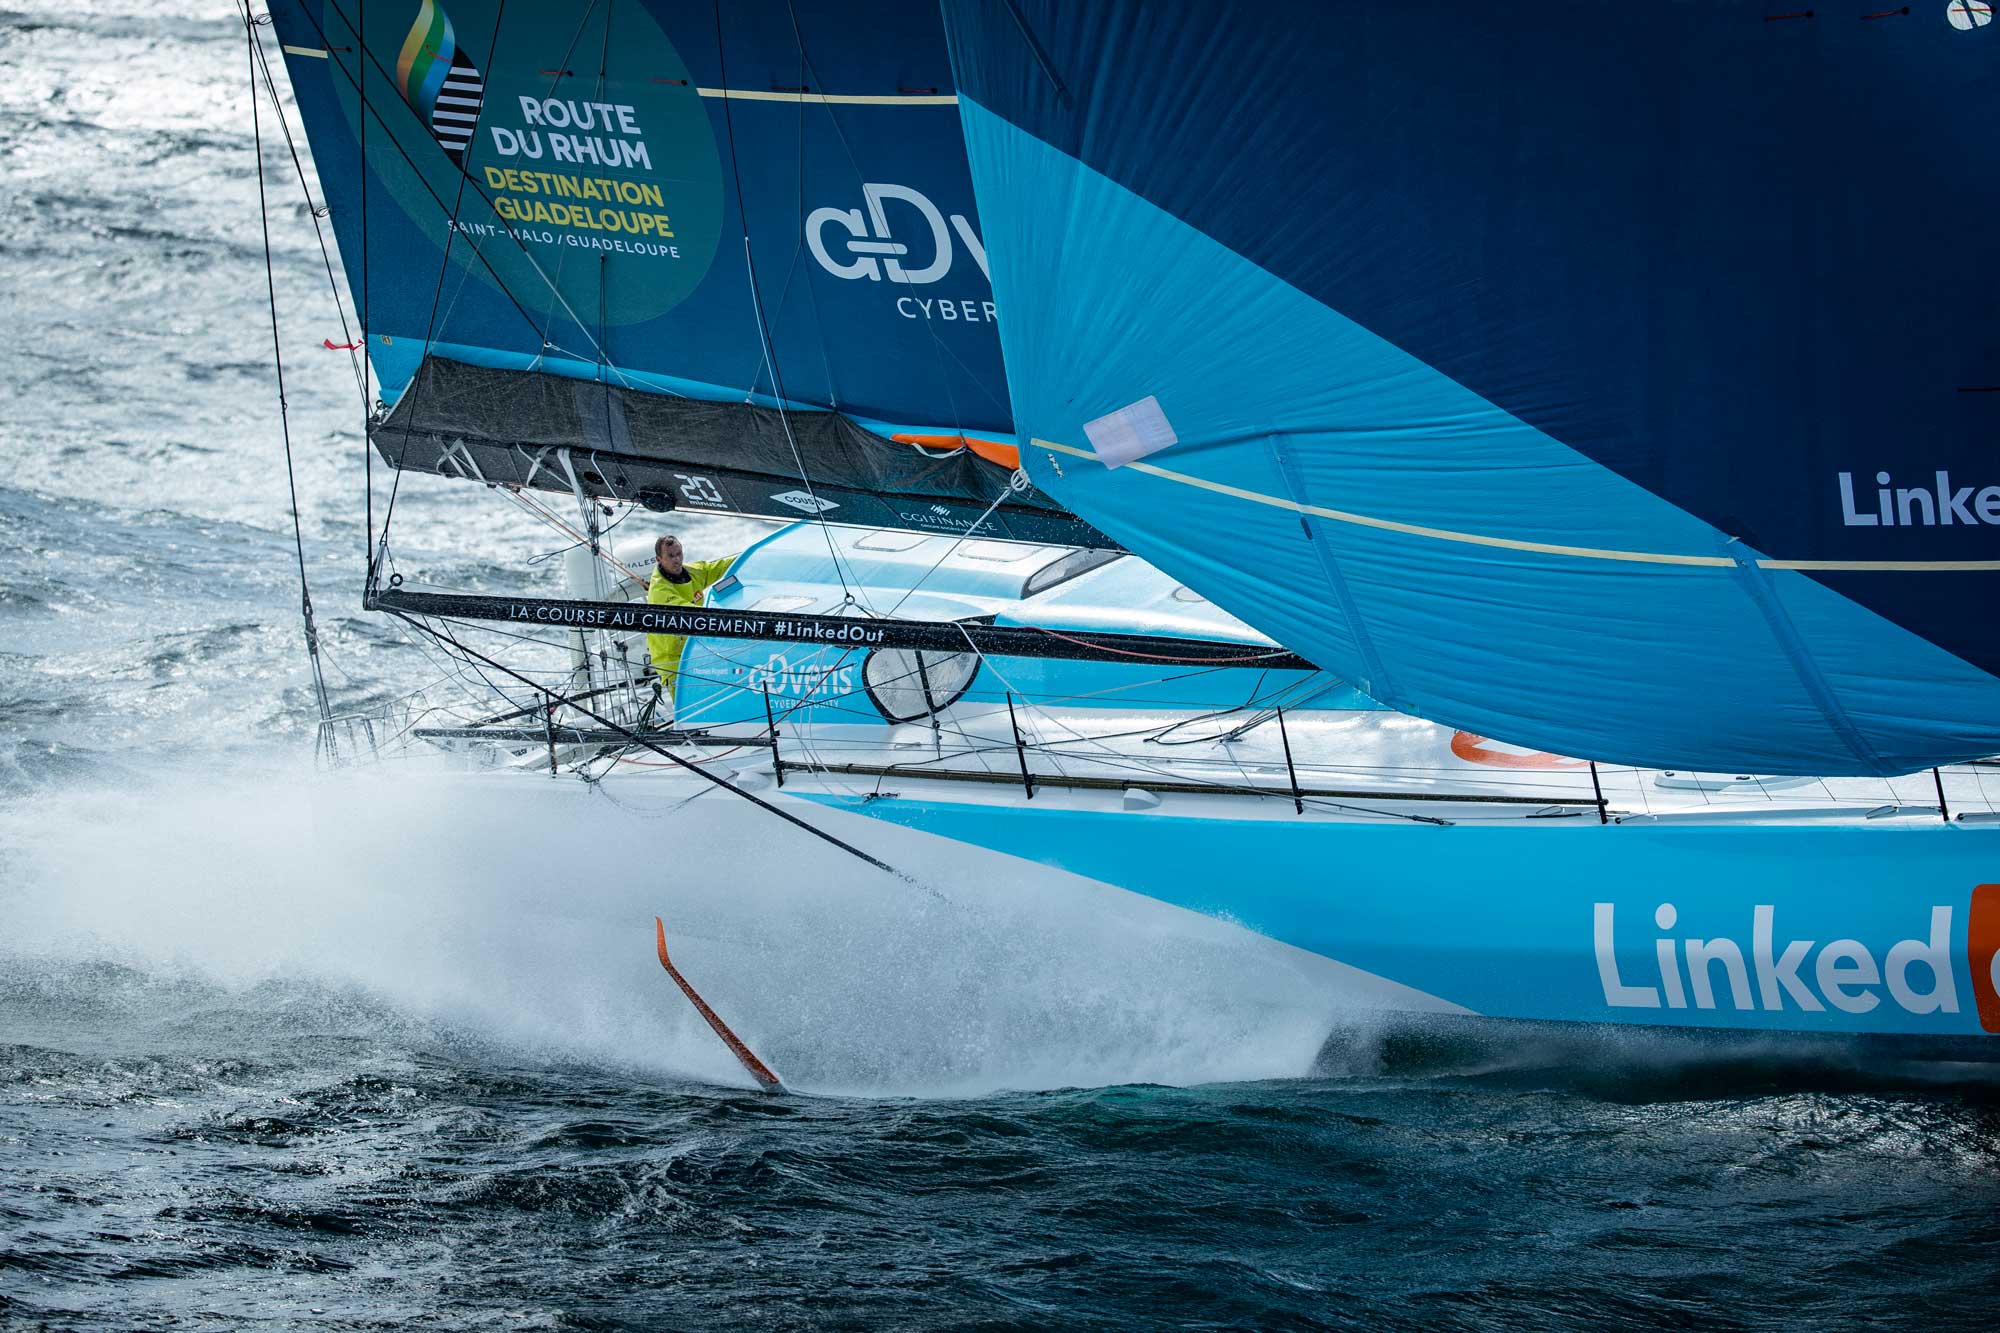 World's coolest yachts: Charal IMOCA 60 - Yachting World